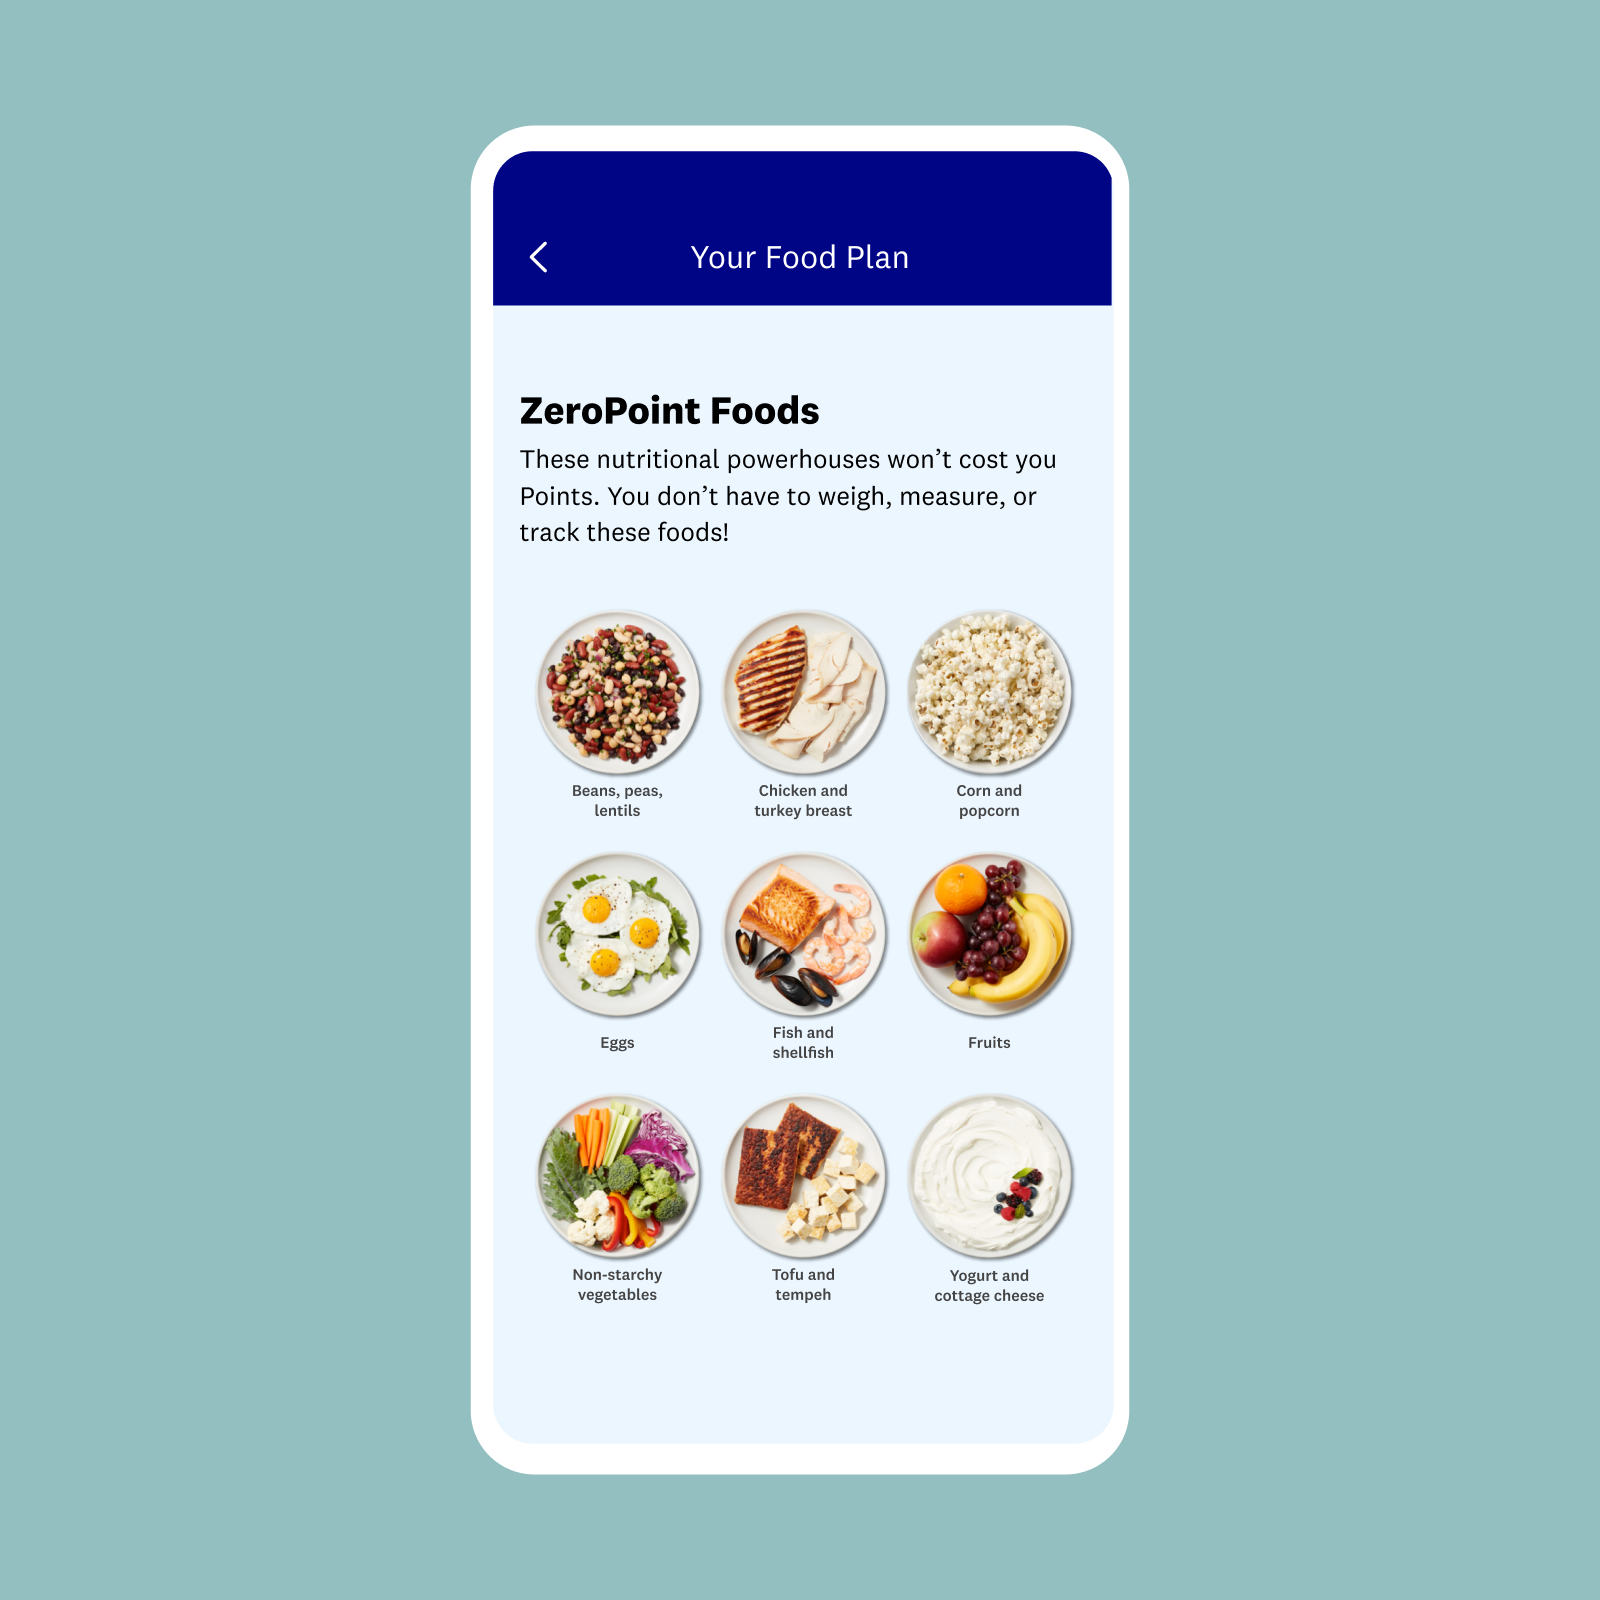 Screenshot of the ZeroPoint Foods in the WW app